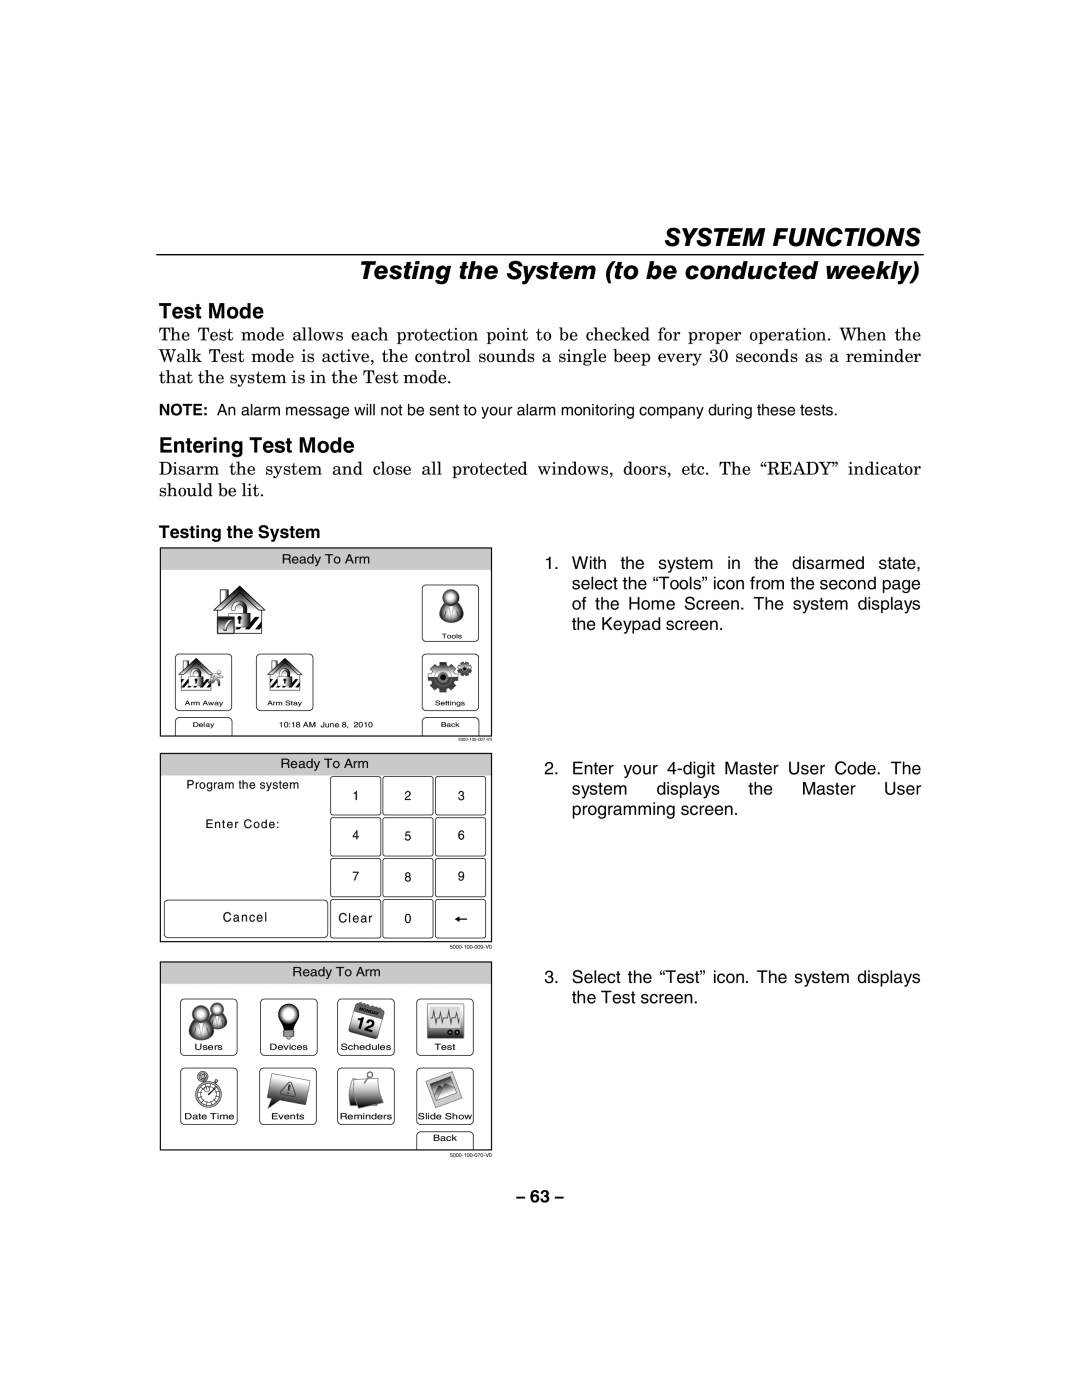 Honeywell 800-06894 manual System Functions, Testing the System to be conducted weekly, Entering Test Mode 